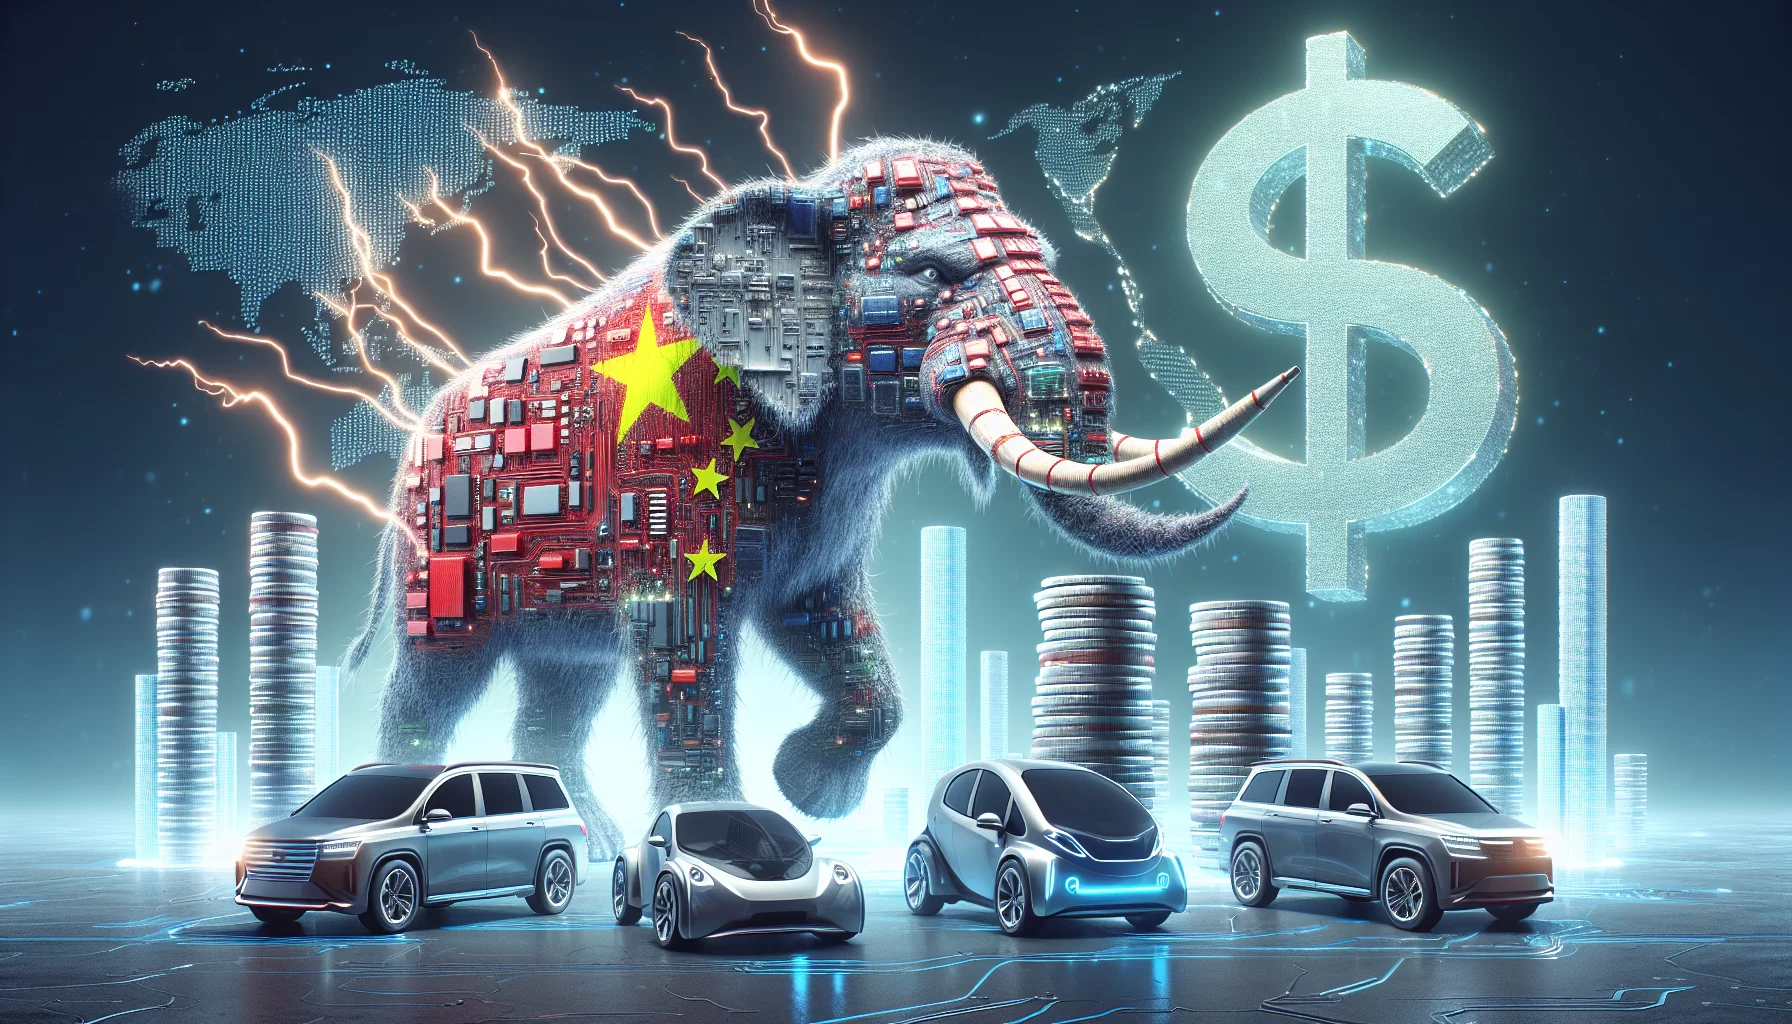 China's mammoth $230 billion investment: revolutionizing the global electric vehicle industry and opening up investor opportunities